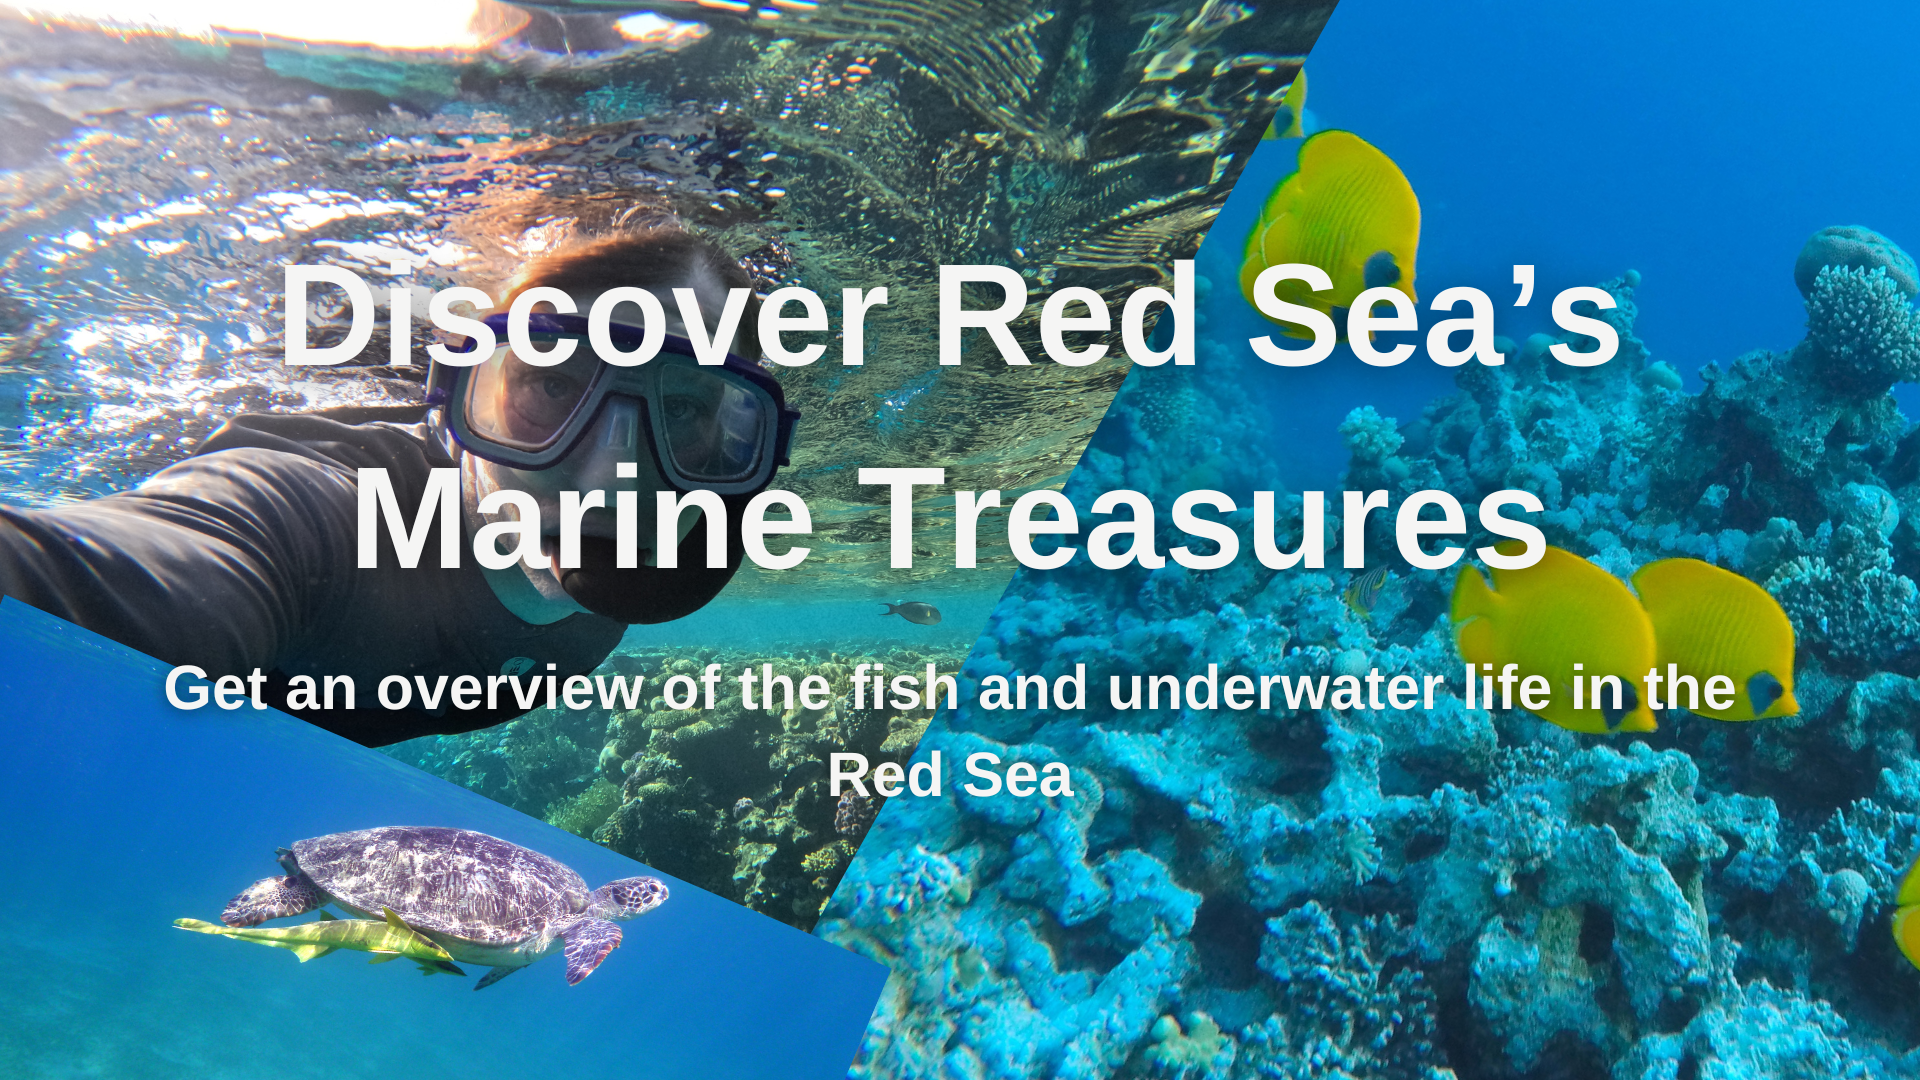 participate in the webinar, where you get an overview of the fish and underwater life in the Red Sea